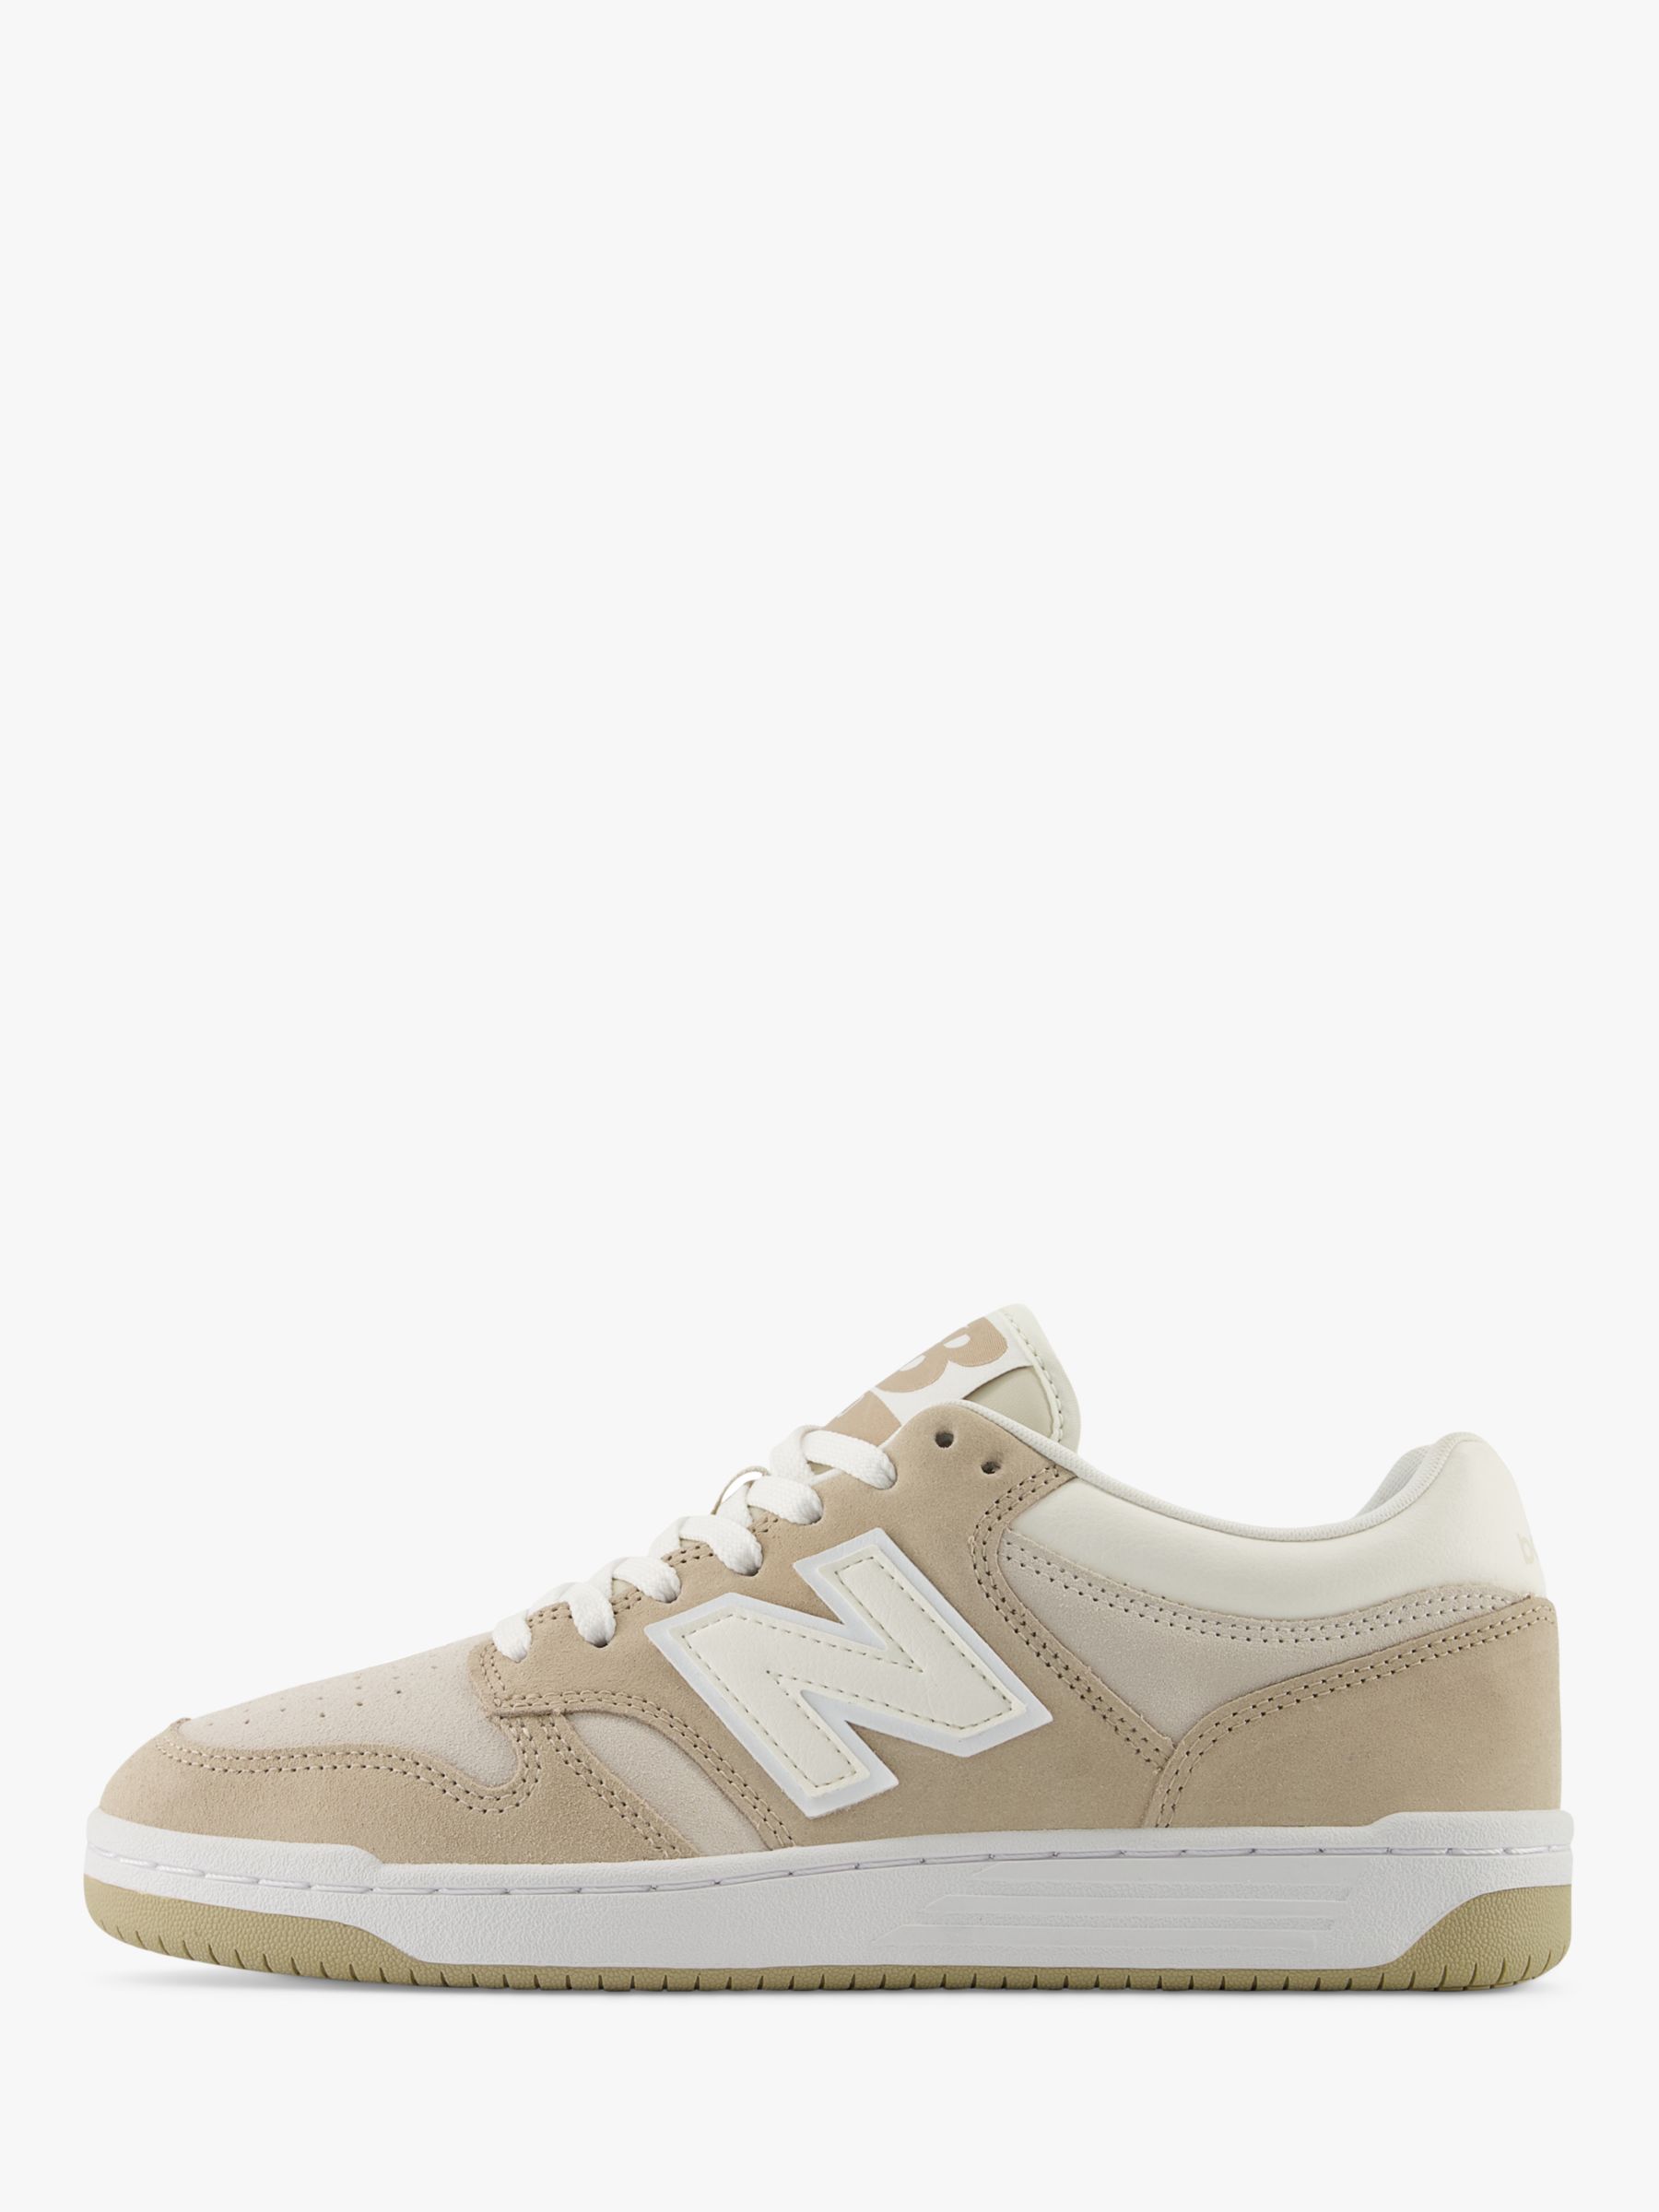 New Balance 480 Lace Up Trainers, Beige/White, 7